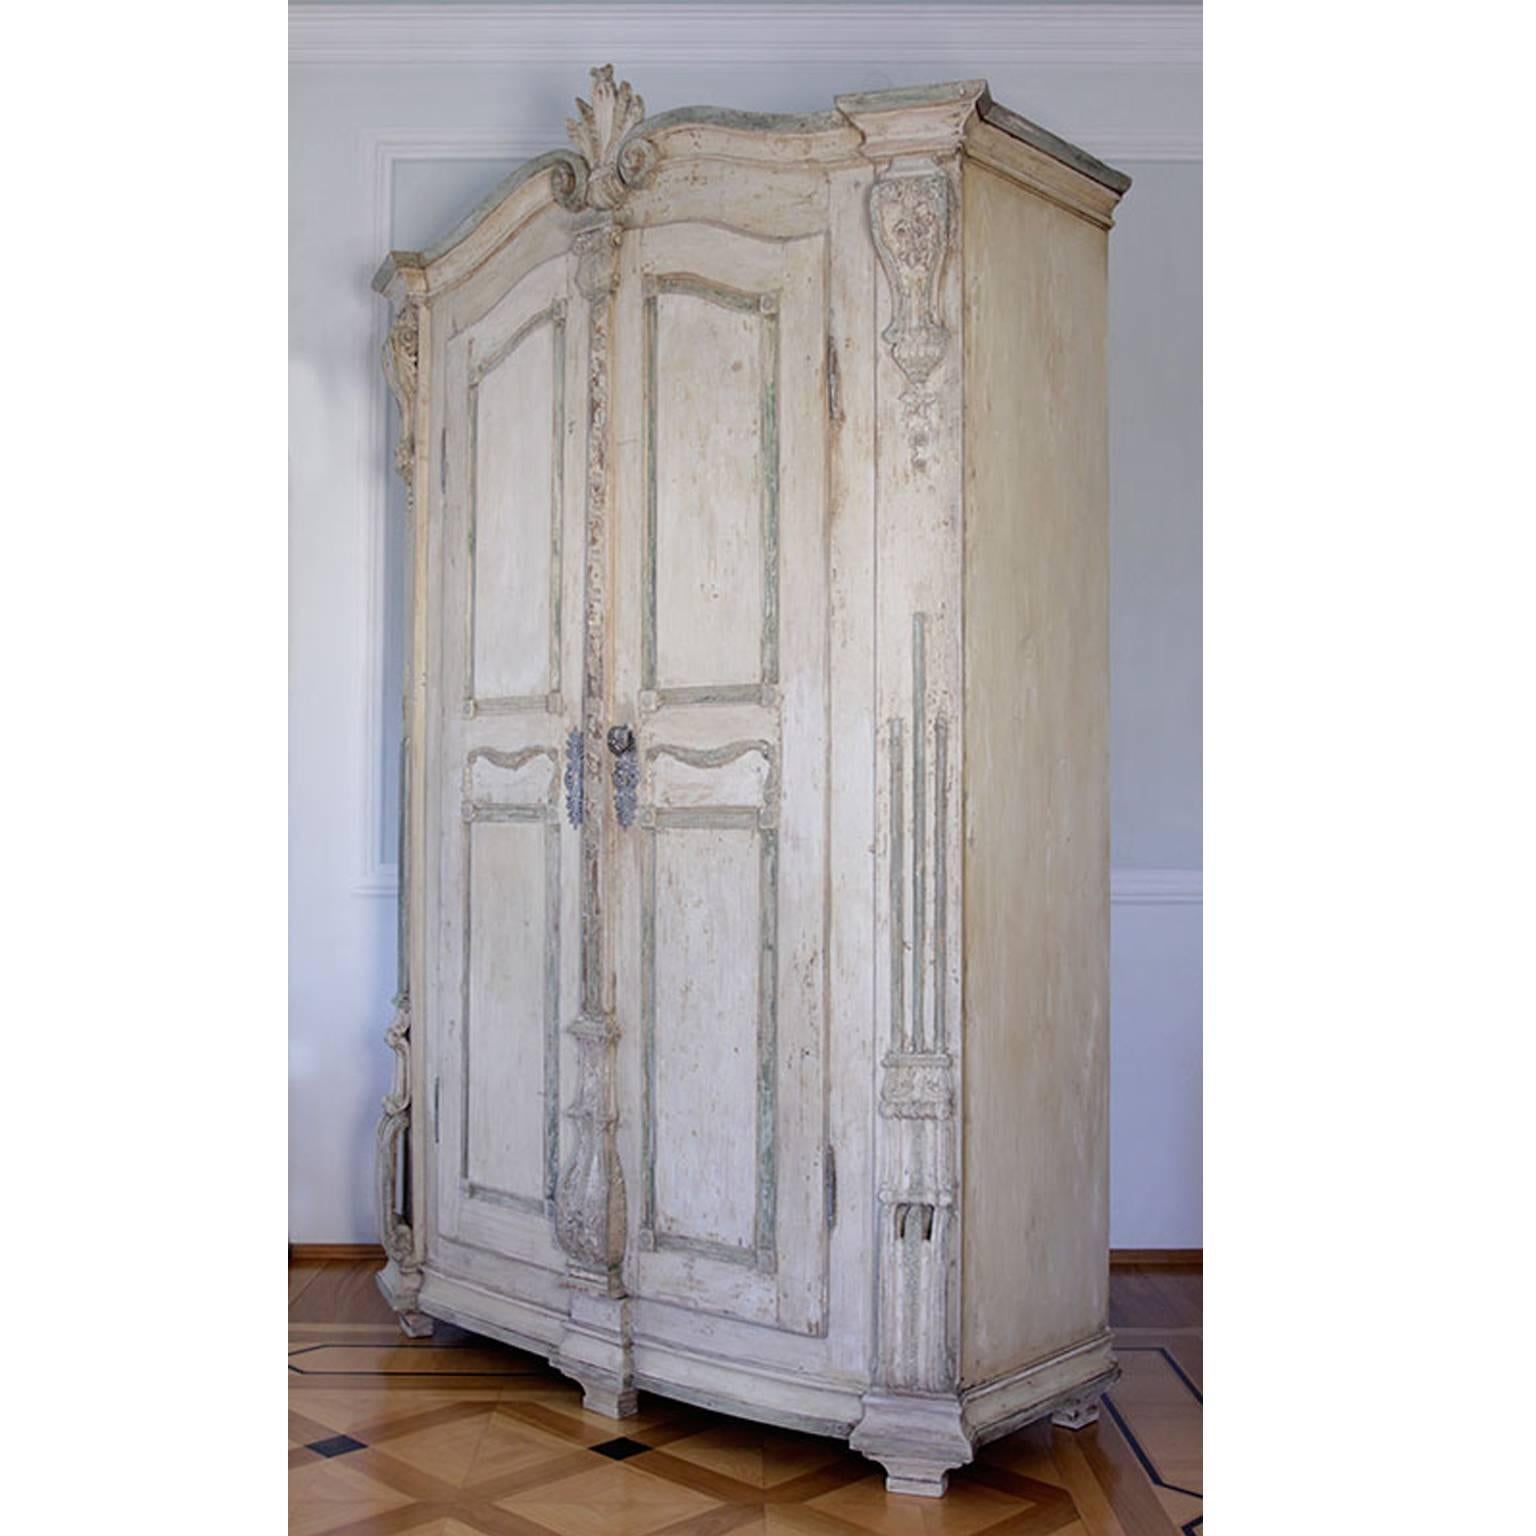 A cabinet with a spruce body retaining the original finish. The piece features a widely offset pilaster strip with acanthus leaf decoration together with perforated base volutes, a corresponding cleat, and a wavy crowning piece. The doors are